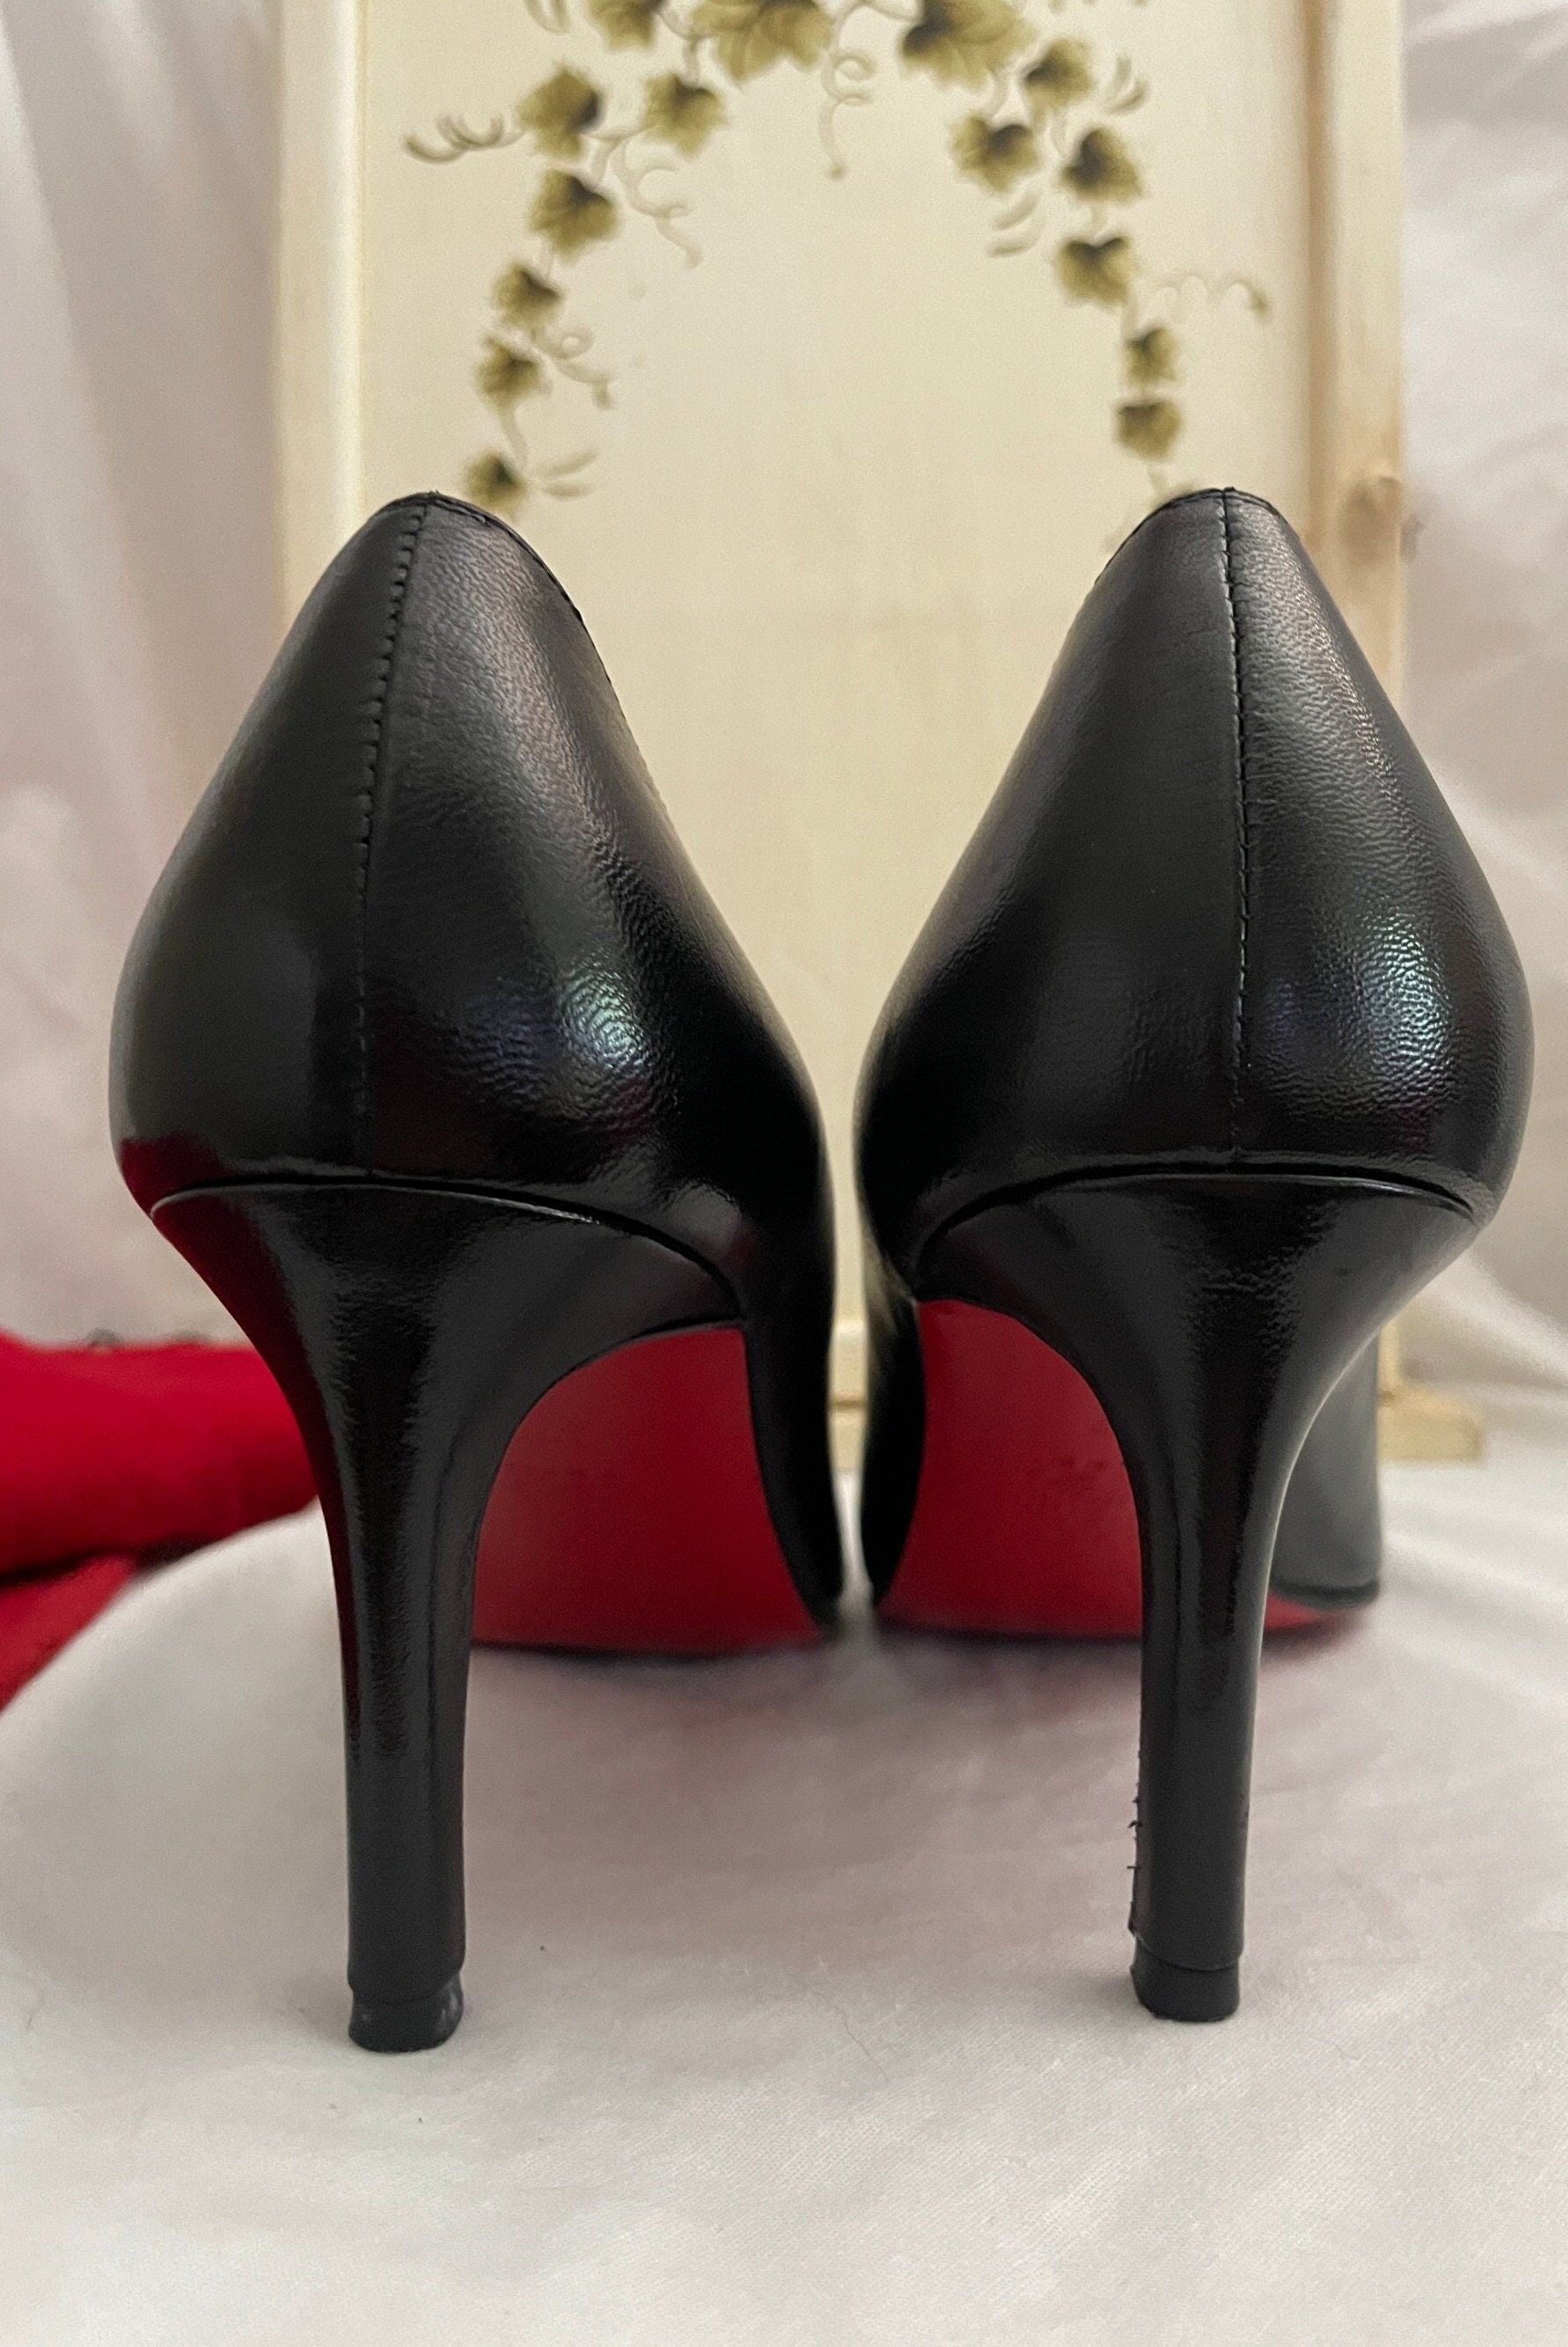 Christian Louboutin Strass Pumps, Classics Heels for Women for